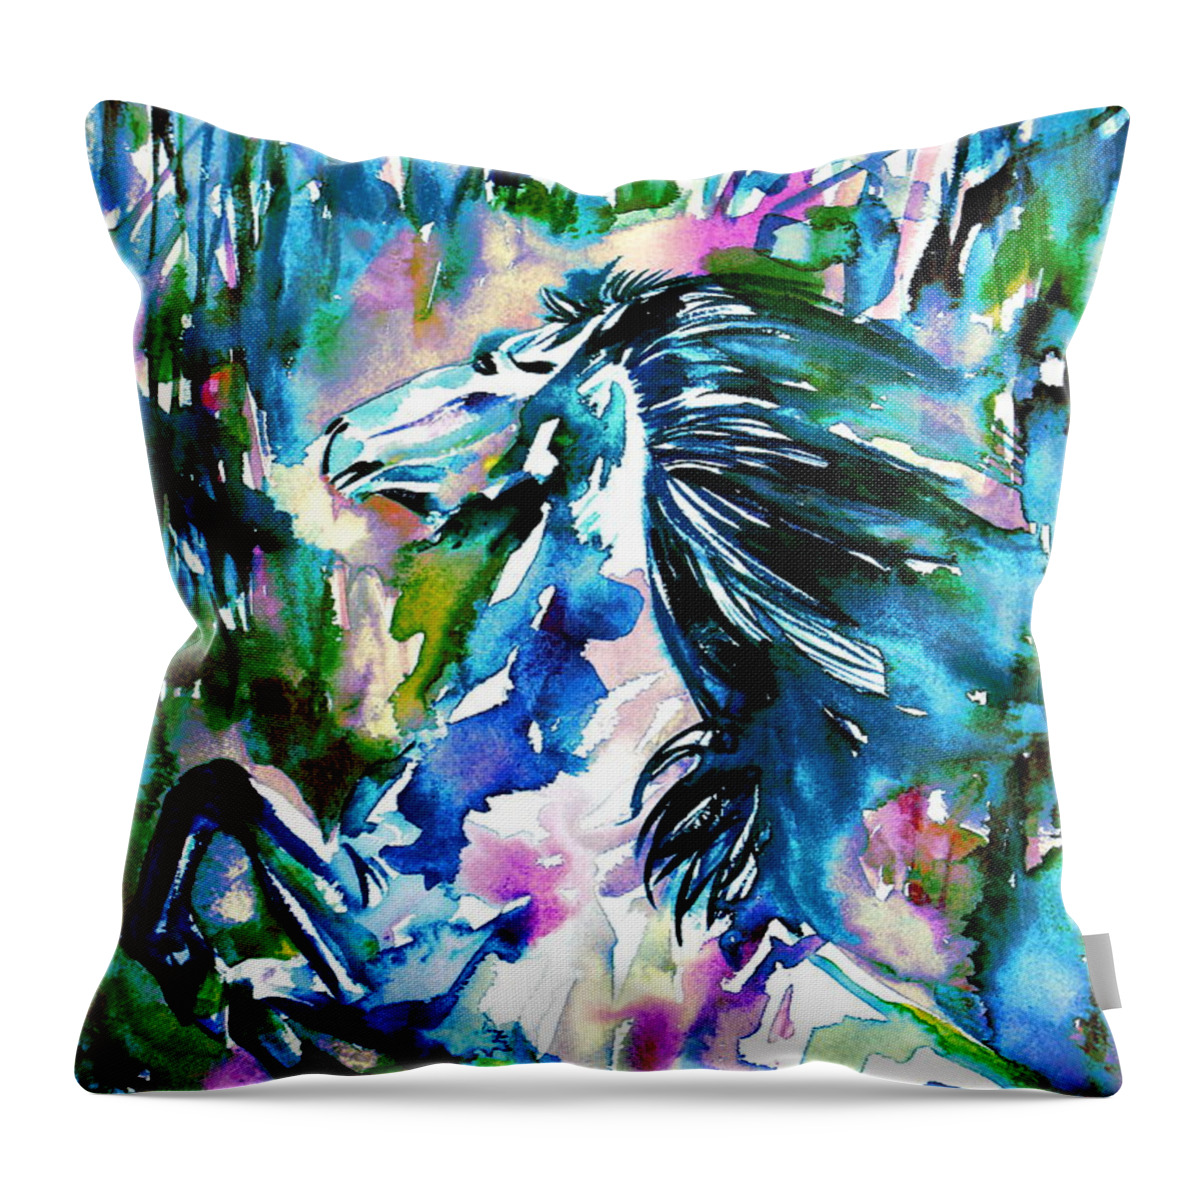 Horse Throw Pillow featuring the painting Horse Painting.37 by Fabrizio Cassetta